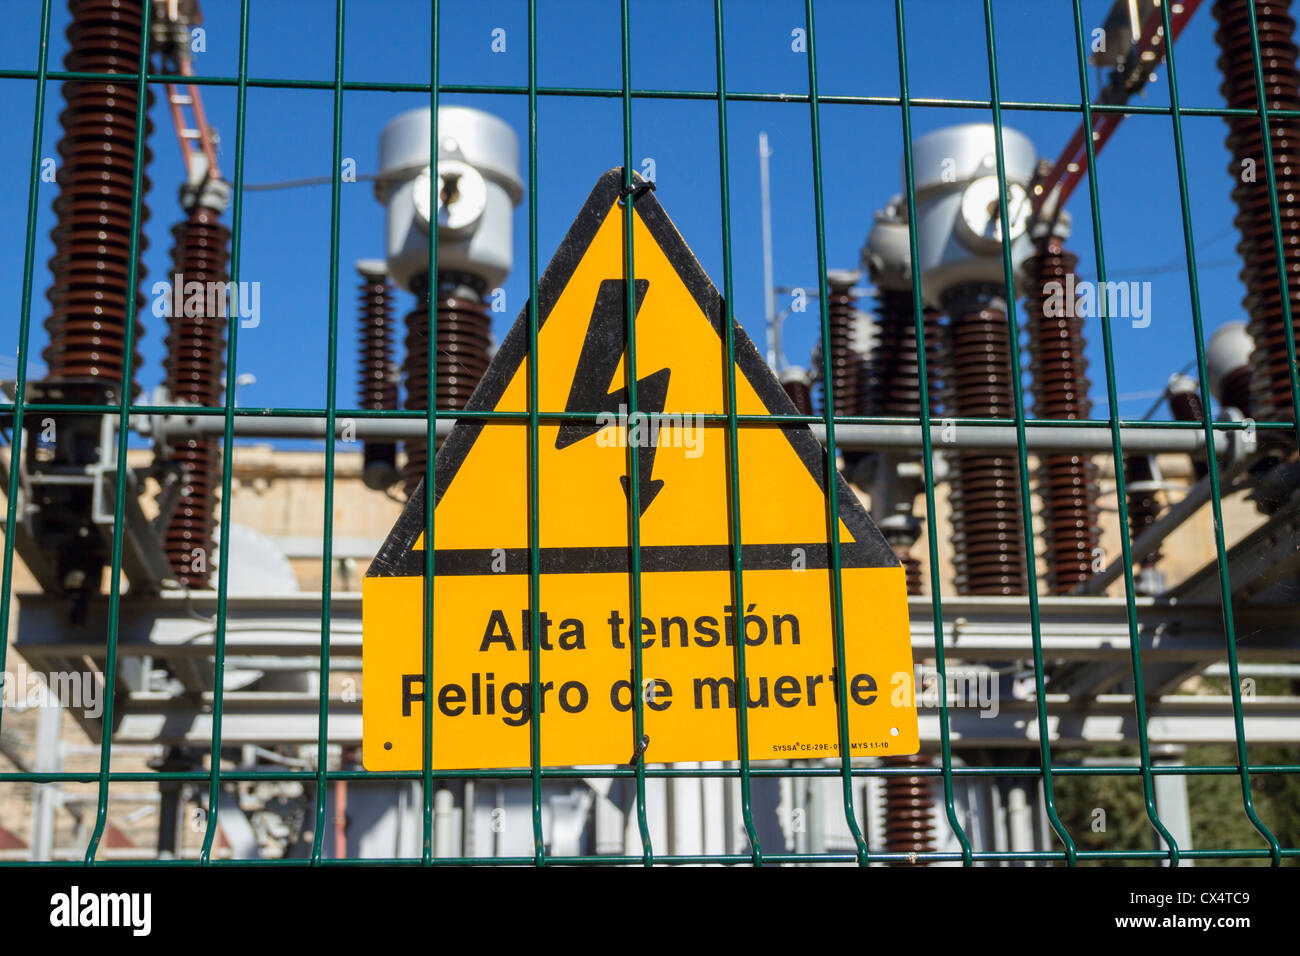 Alta tension peligro de muerto (high tension danger of death) sign on hydro electric power station in Spain Stock Photo